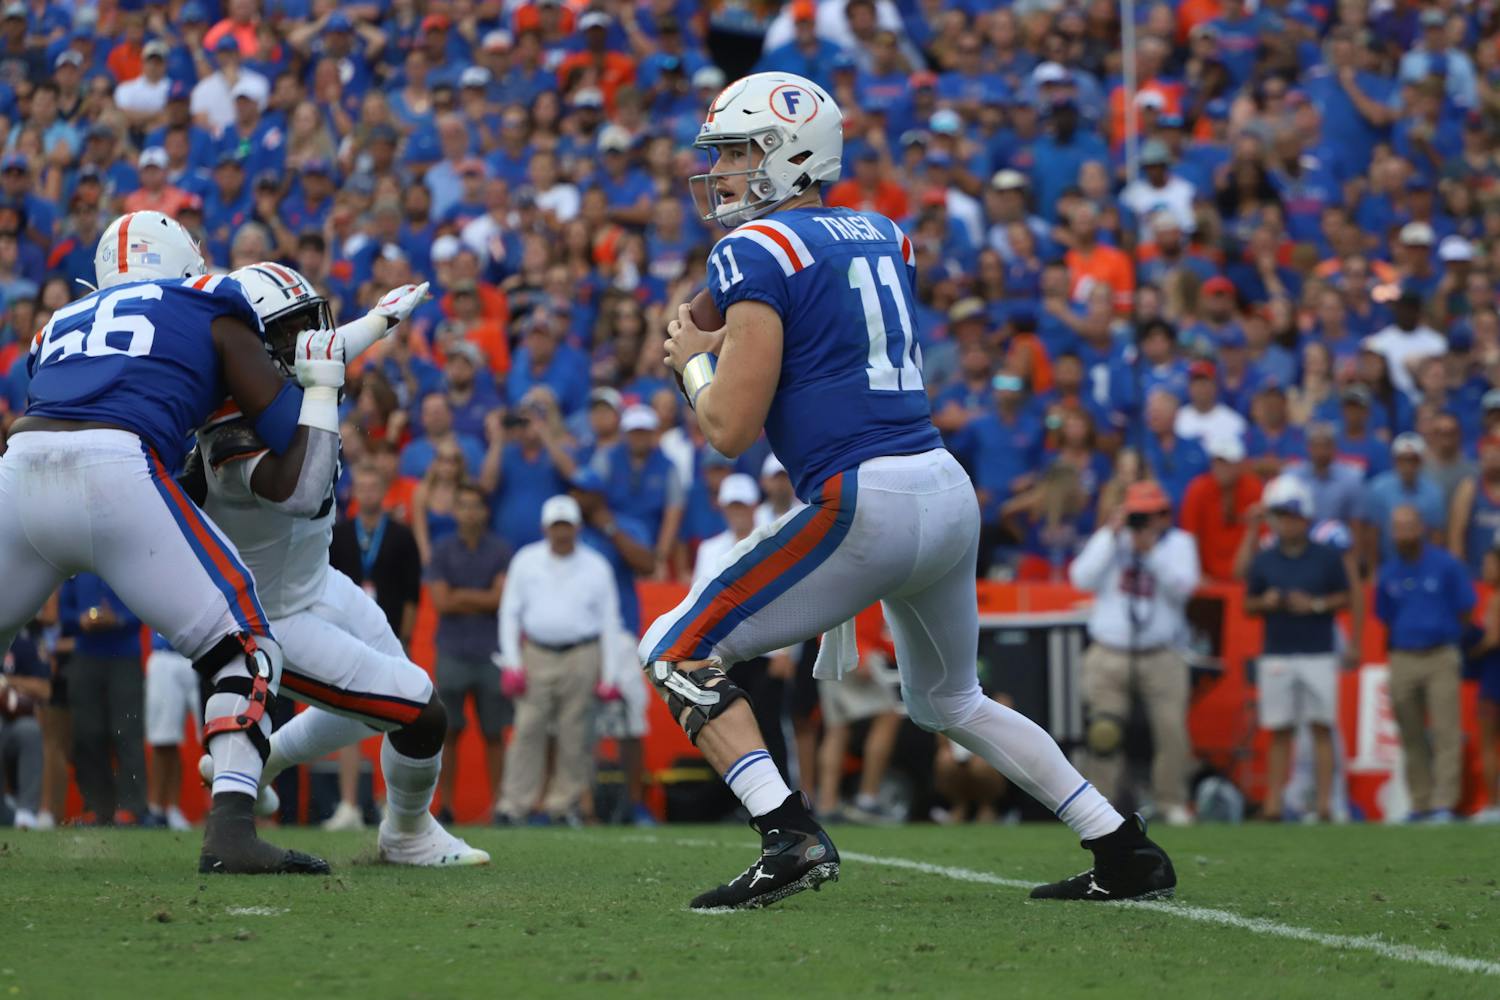 Florida quarterback Kyle Trask drops back to pass against the Auburn Tigers Oct. 5, 2019. Trask is now a member of the NFL&#x27;s Tampa Bay Buccaneers. ﻿